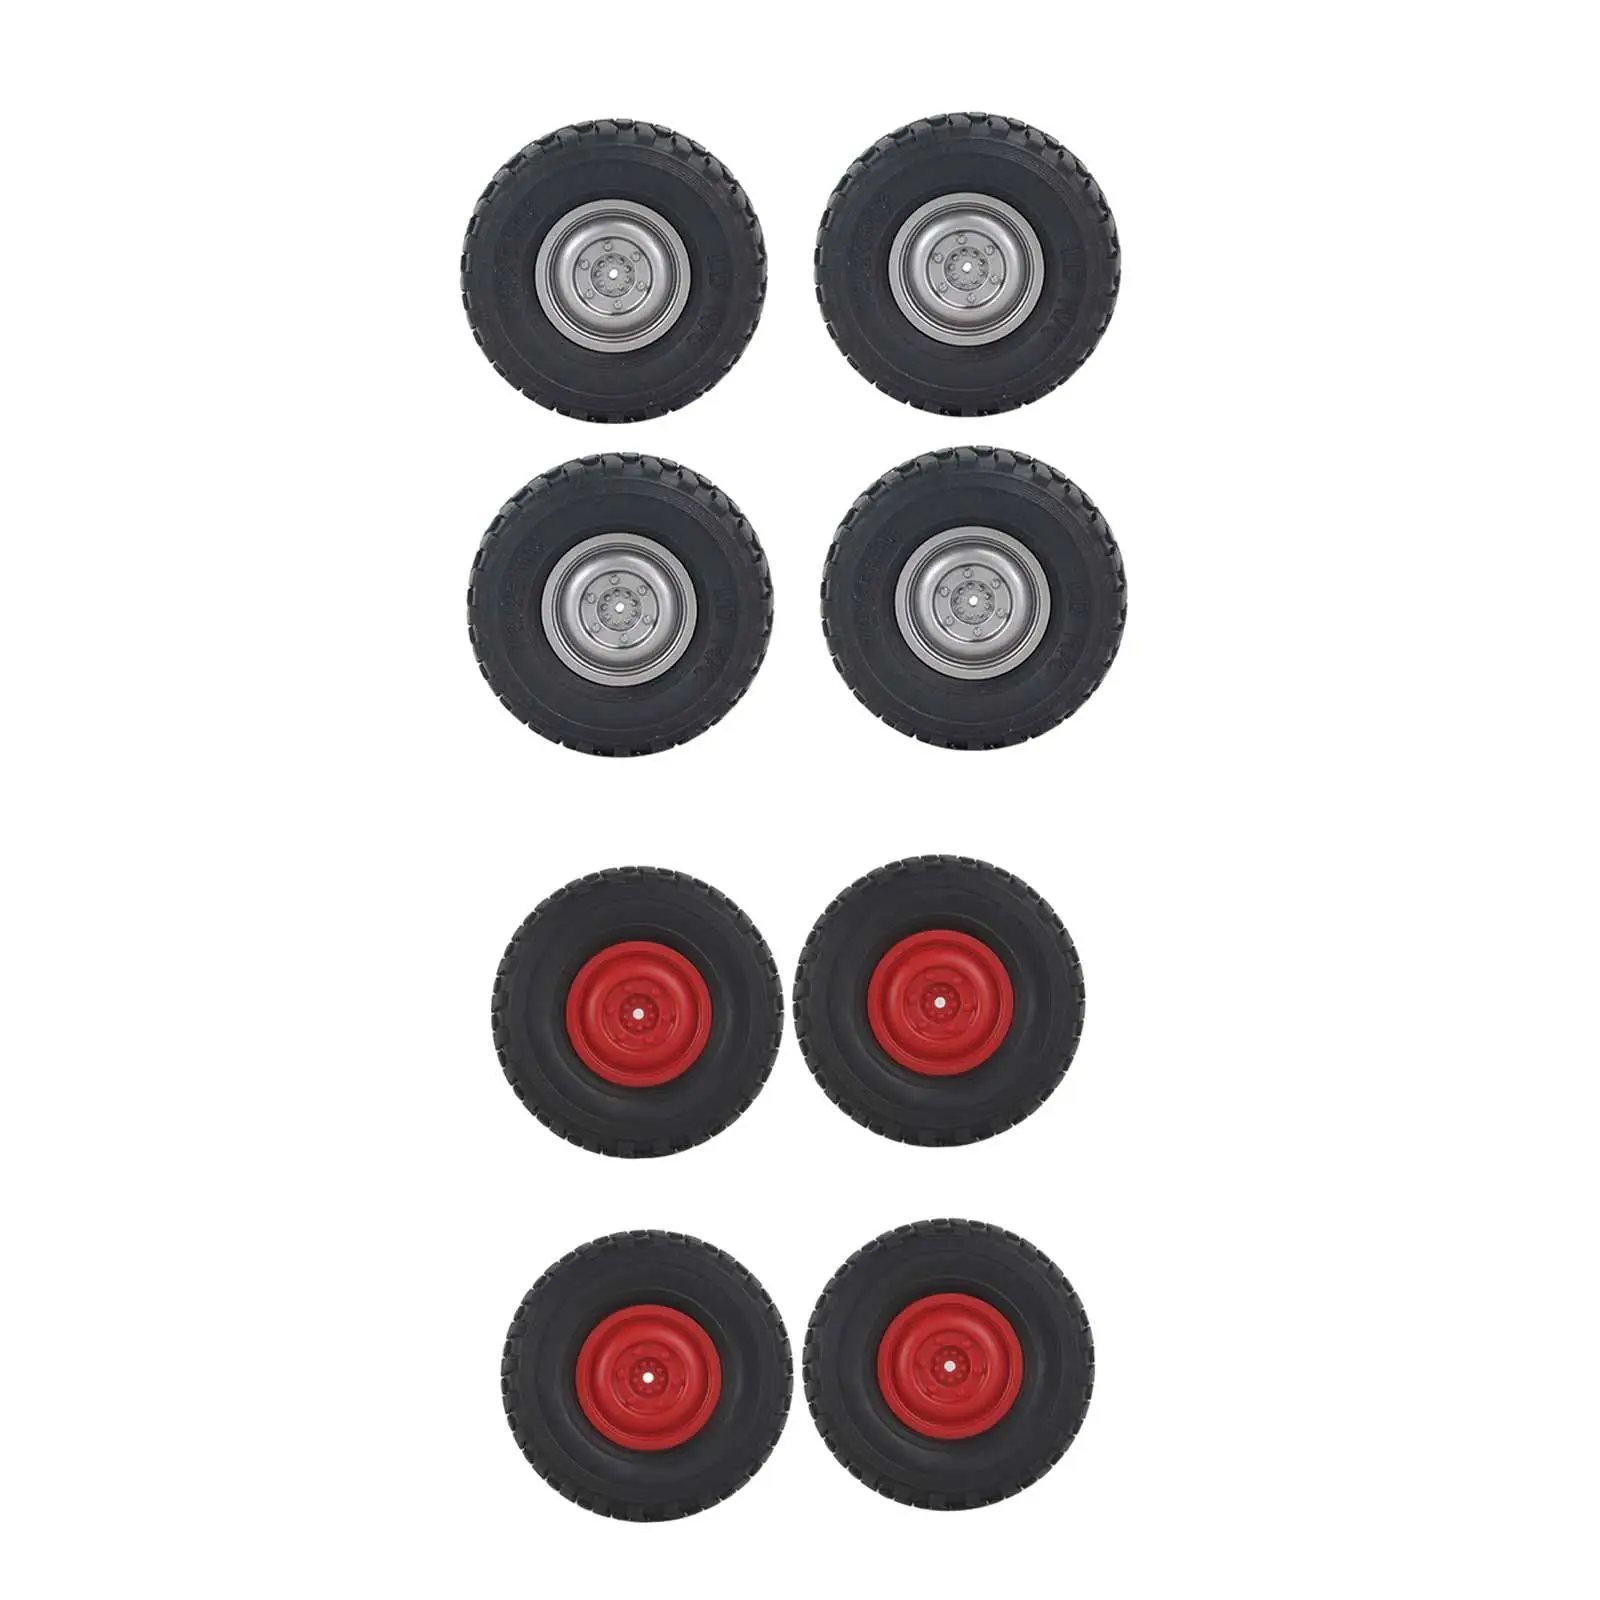 

4x Wheel Tires 1/16 Scale Upgrade Parts RC Car Tires RC Crawler Tires 72mm Soft Tire for WPL B14 C44 Trucks DIY Accs Vehicles